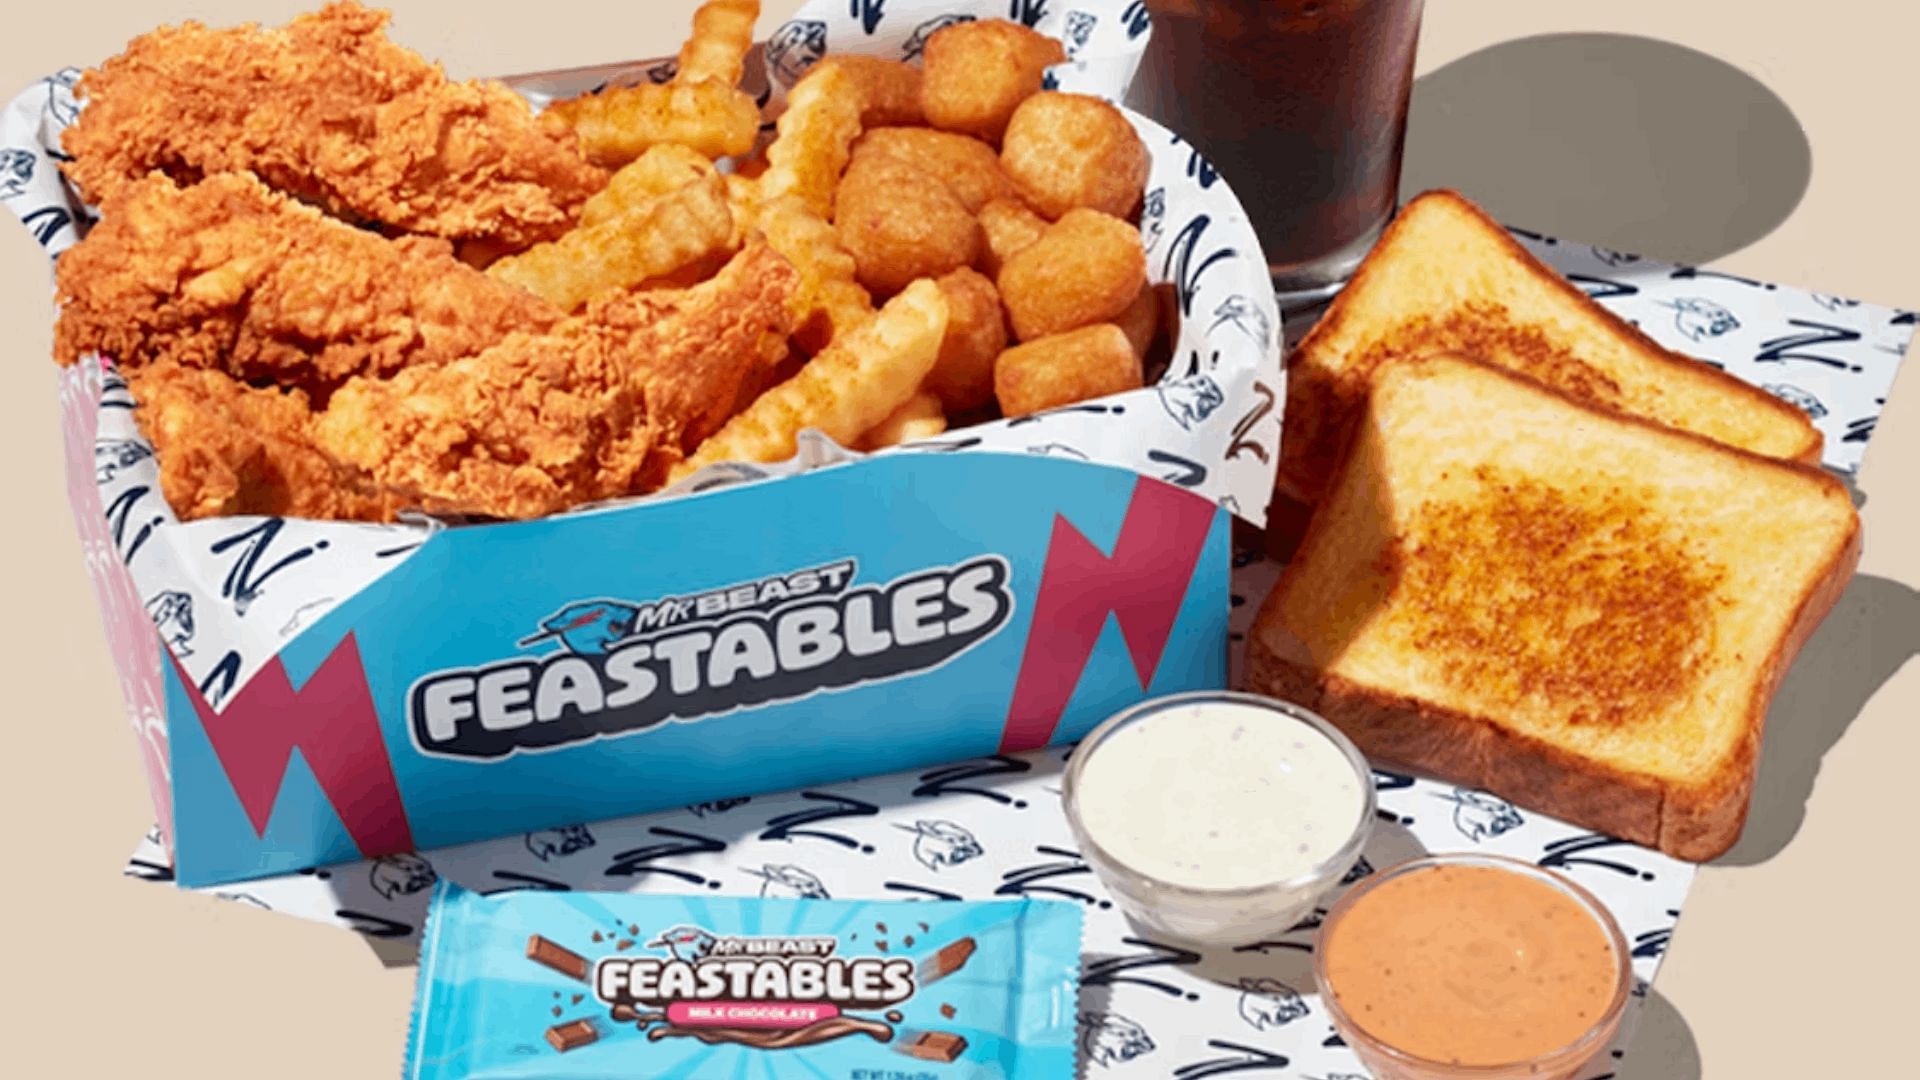 The meal box contains a Feastables milk chocolate bar (Image via Zaxby&#039;s)